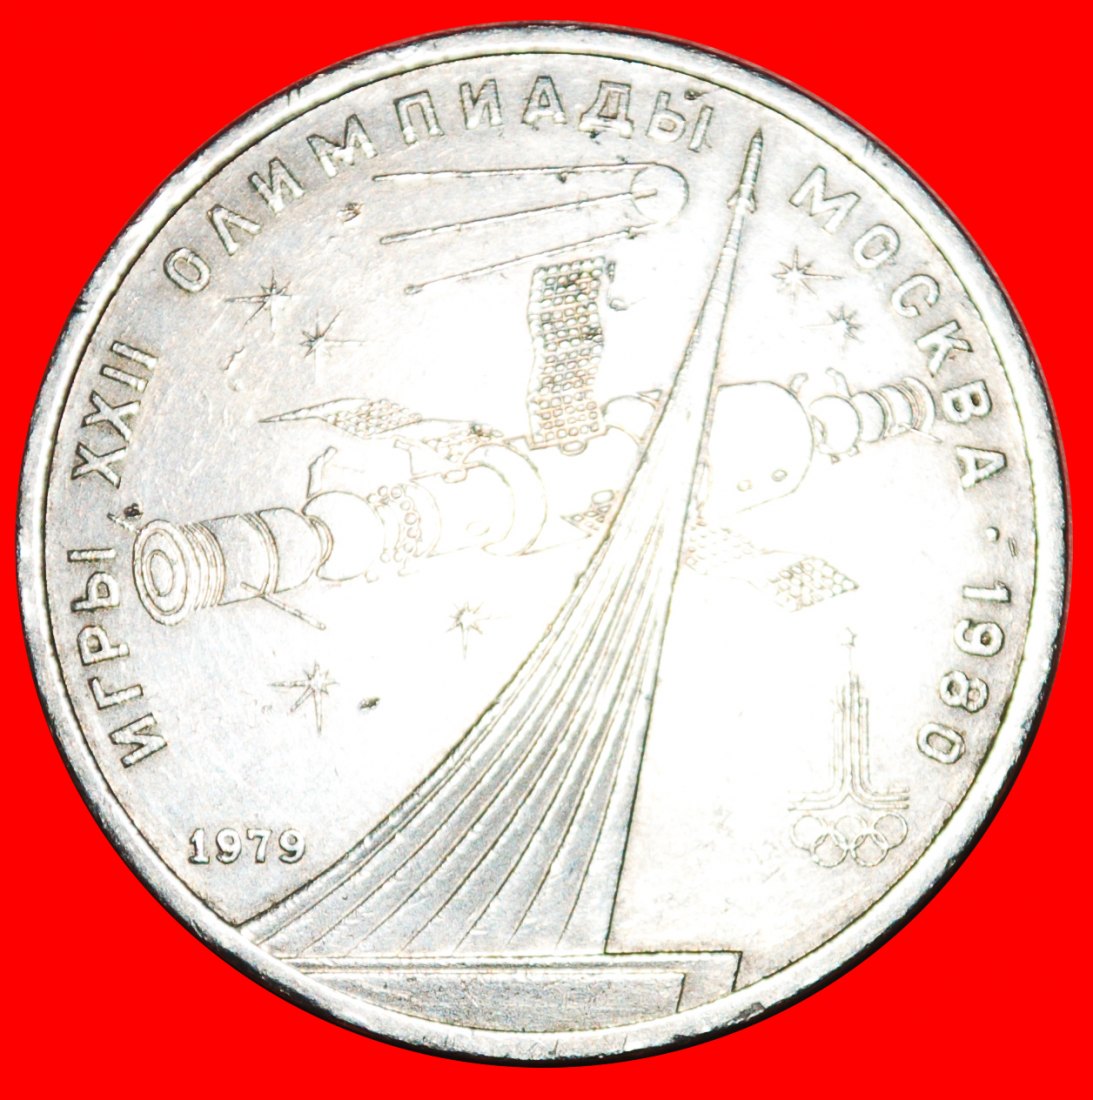  • OLYMPICS 1980: USSR (ex. RUSSIA) ★ 1 ROUBLE 1979! SPACE CONQUEST! LOW START! ★ NO RESERVE!   